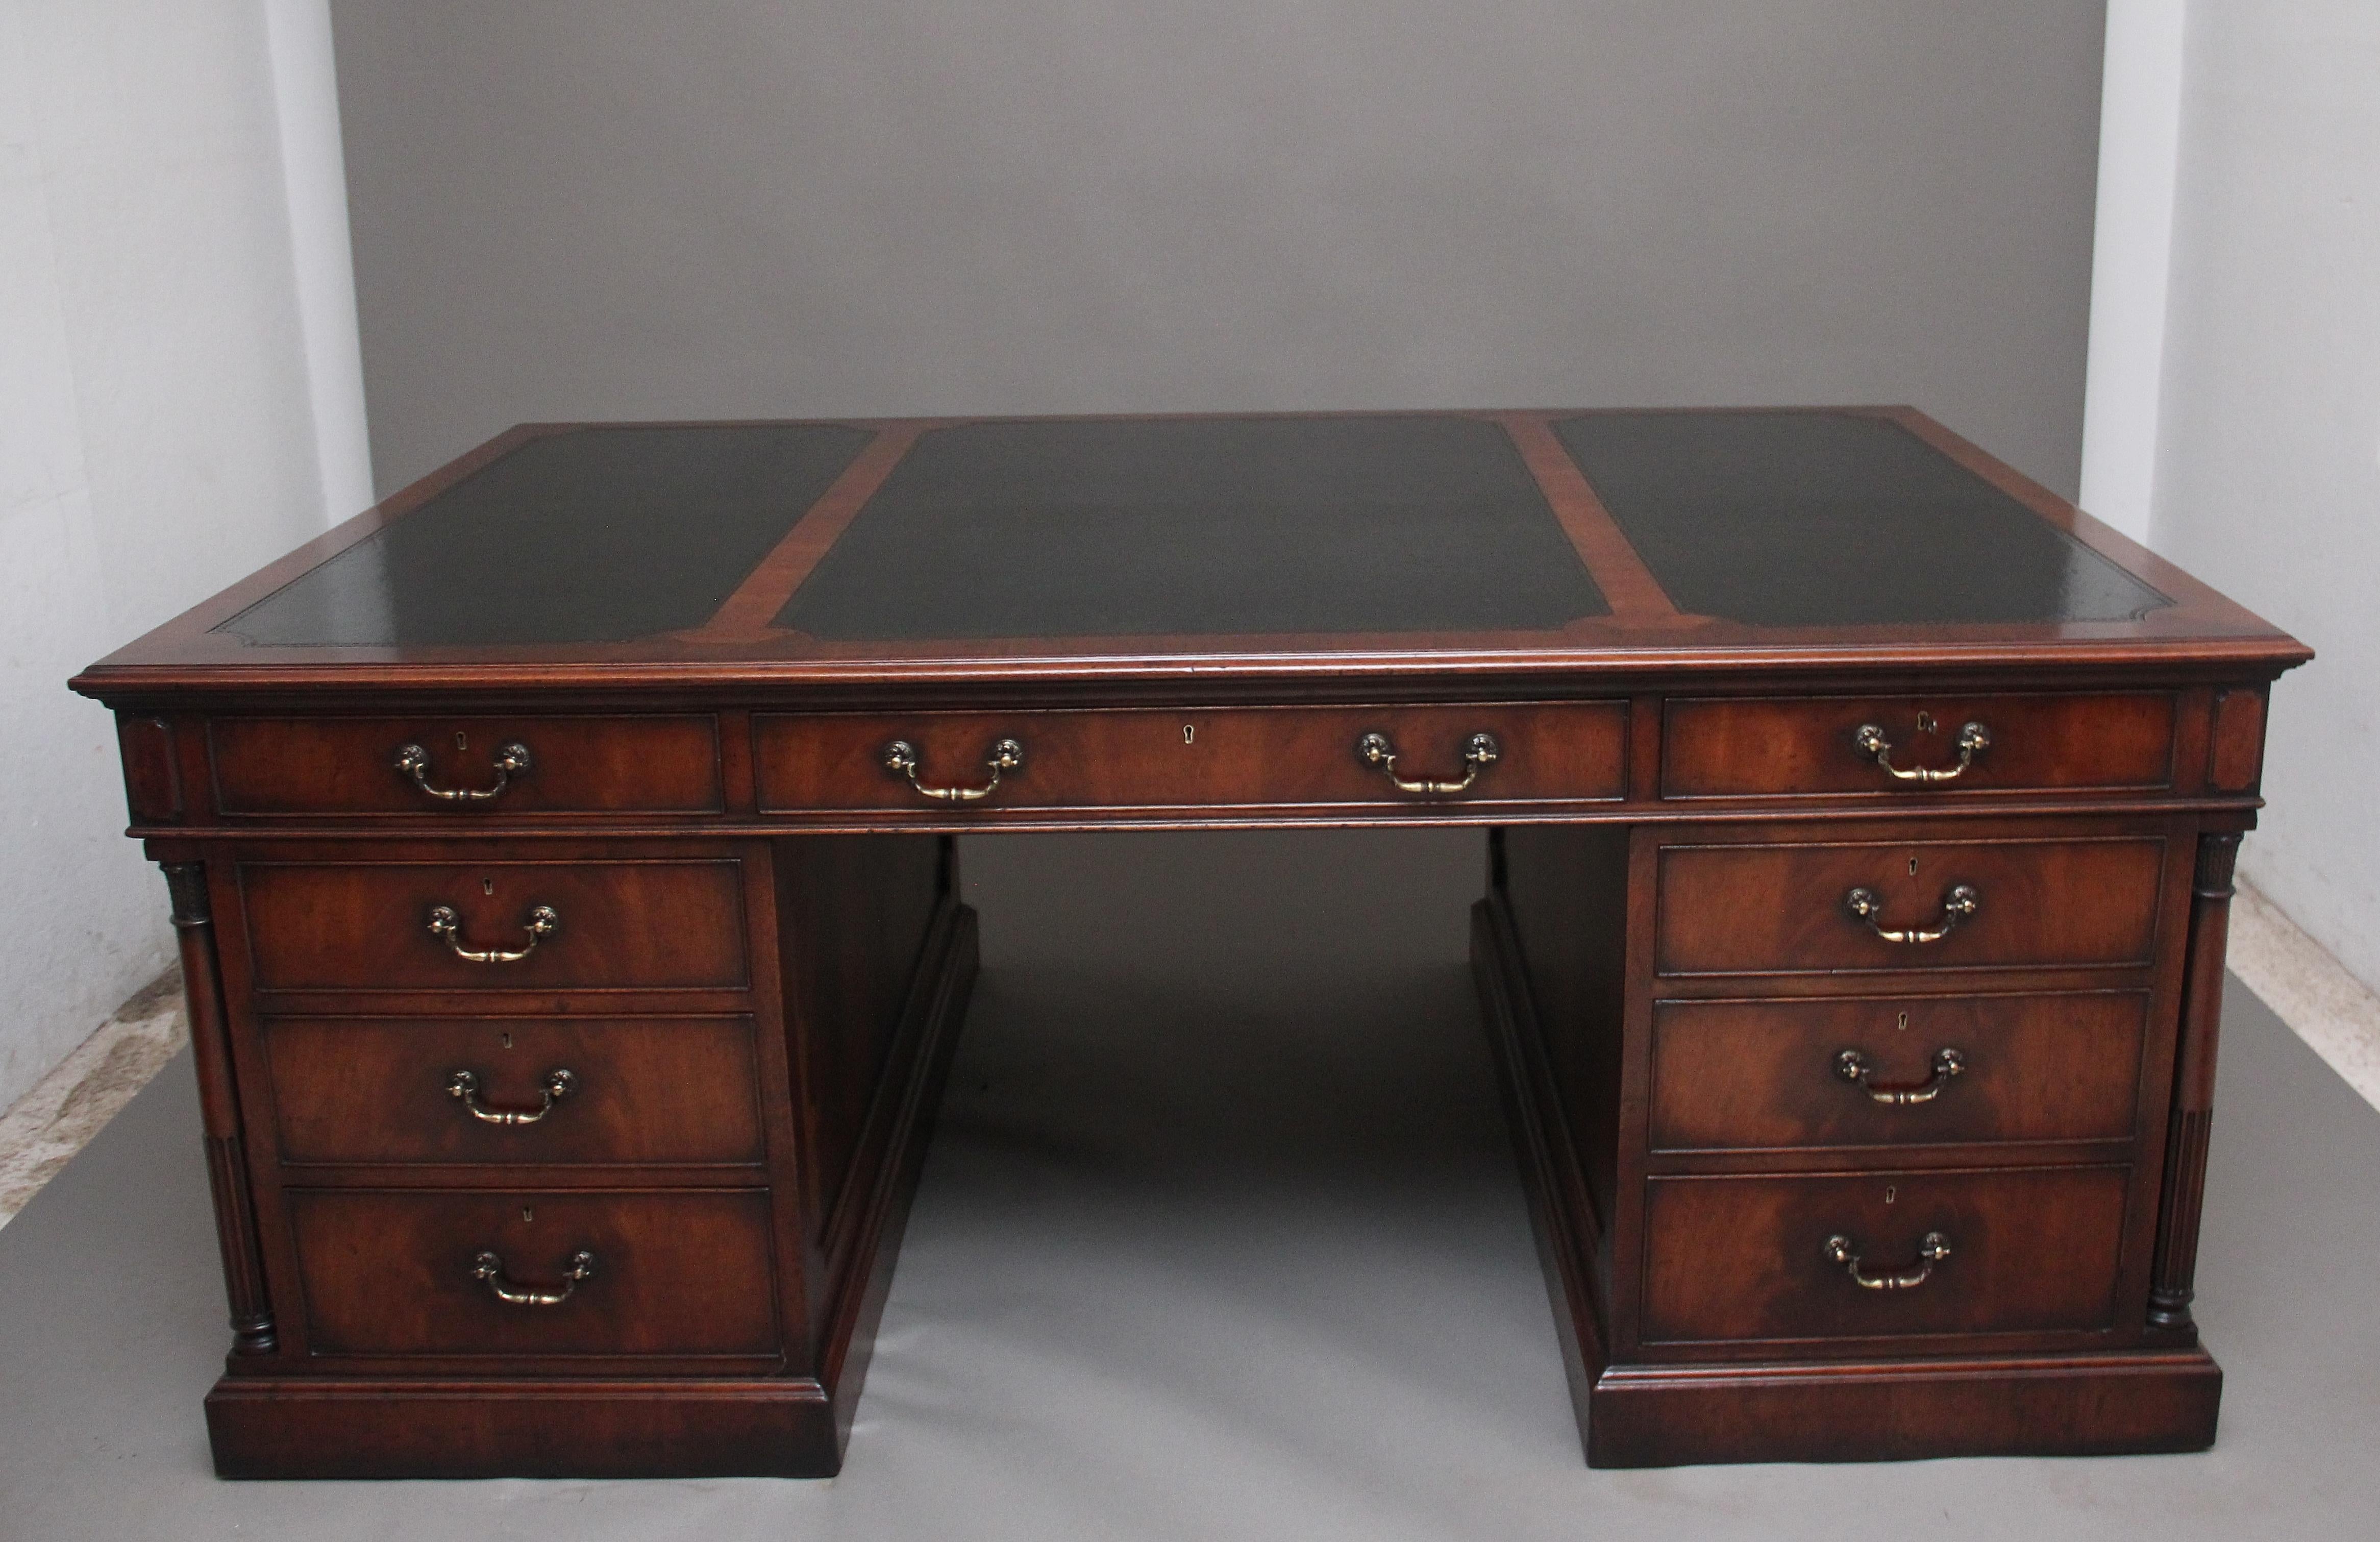 A large and impressive early 20th century mahogany desk, the moulded edge top having a green leather writing surface divided into three shaped sections, the front of the desk having an arrangement of nine long graduated mahogany lined drawers with